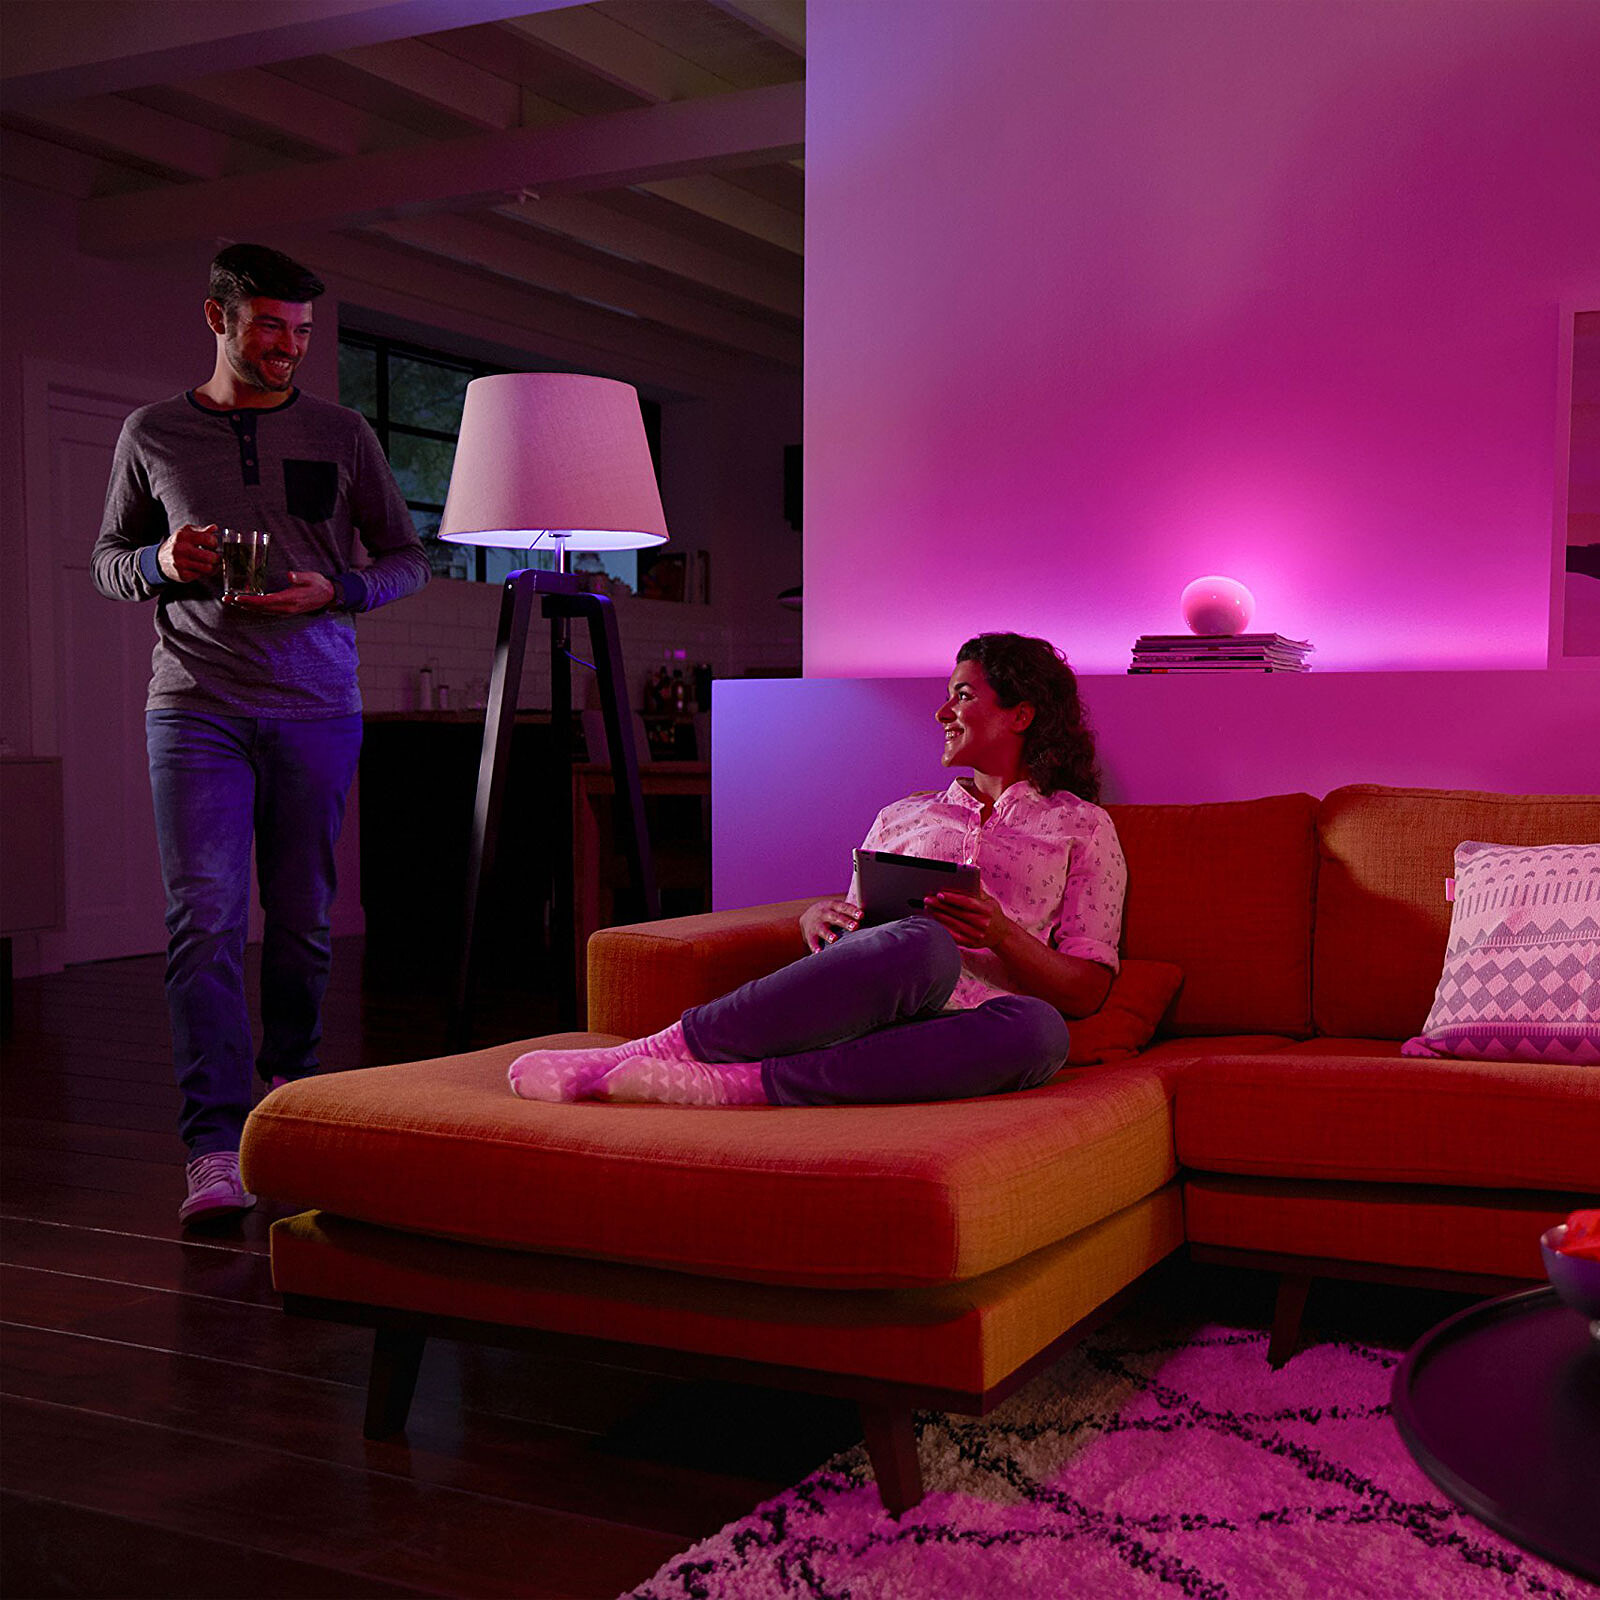 Philips Hue Go White & Color Ambiance Bluetooth - Lampe connectée